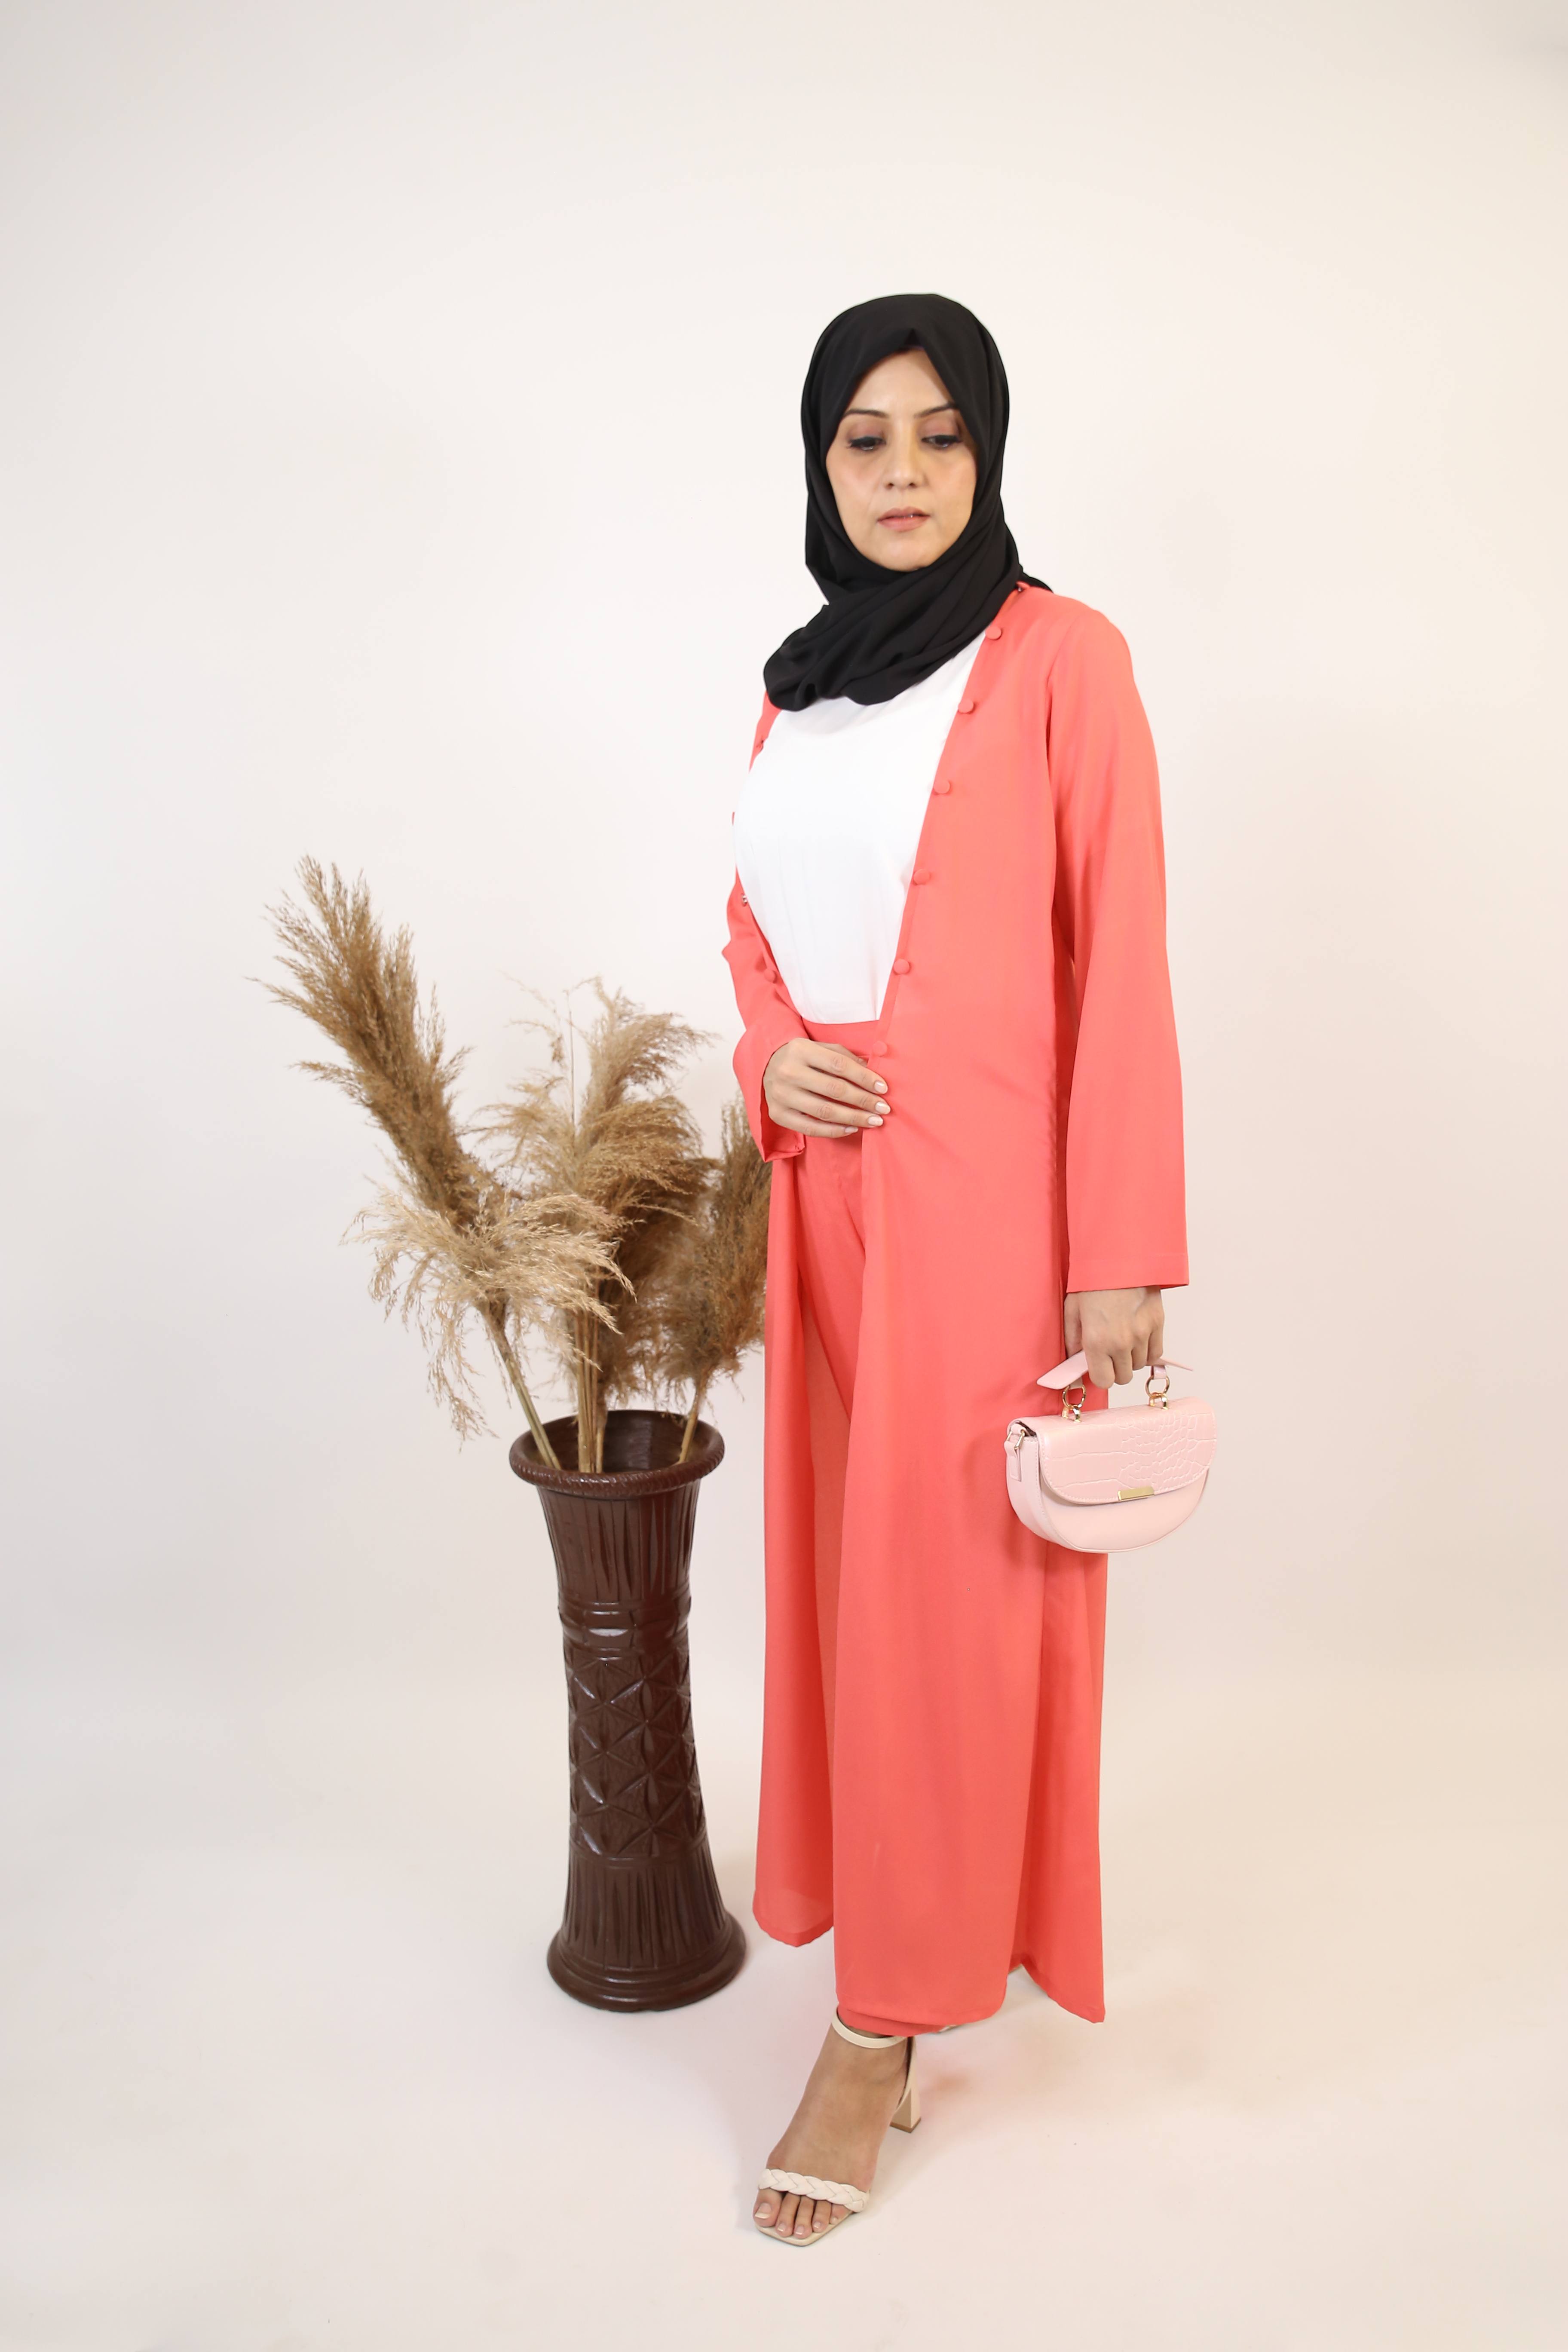 Nuham- Exquisite modest two piece throw over abaya with pant set- Rose pink